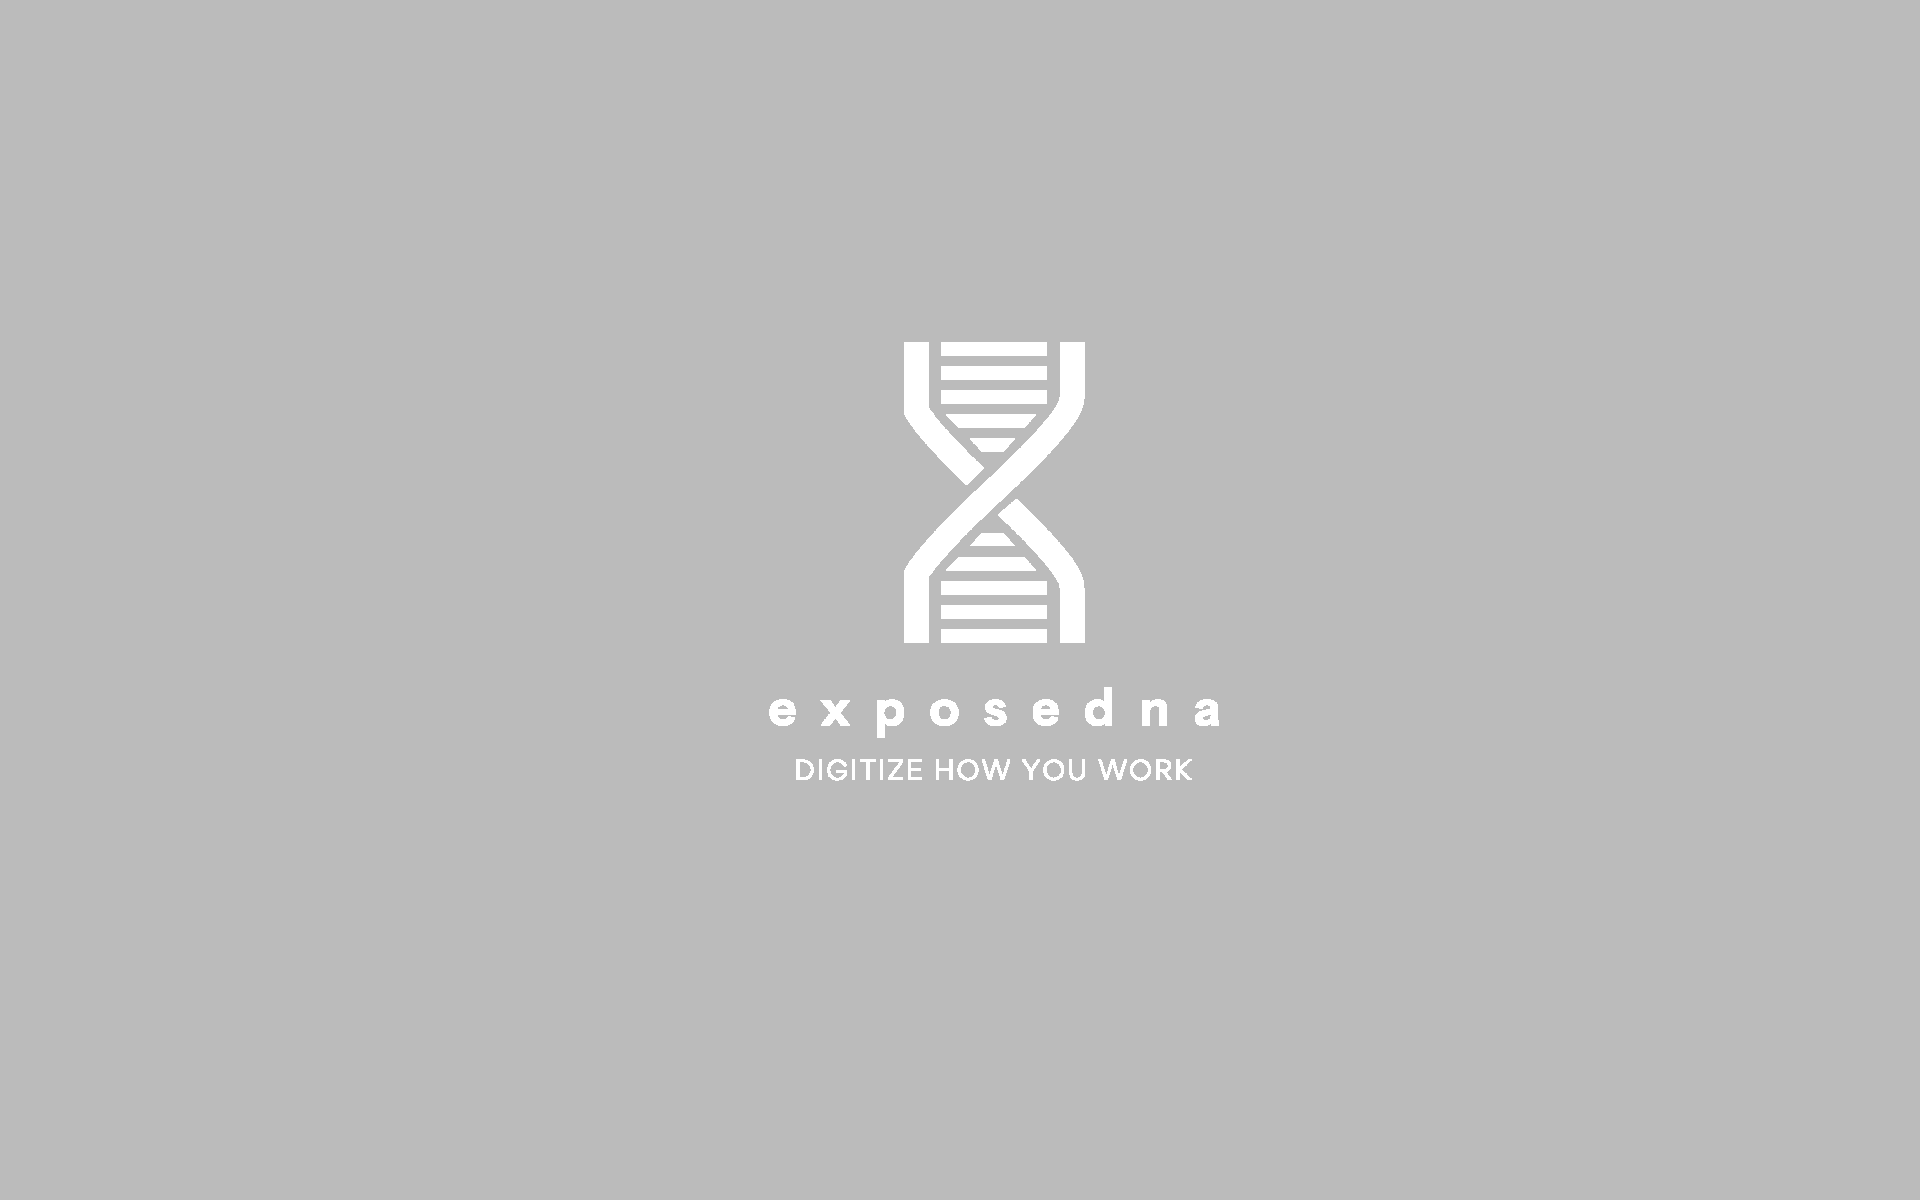 how we work expose dna logo white